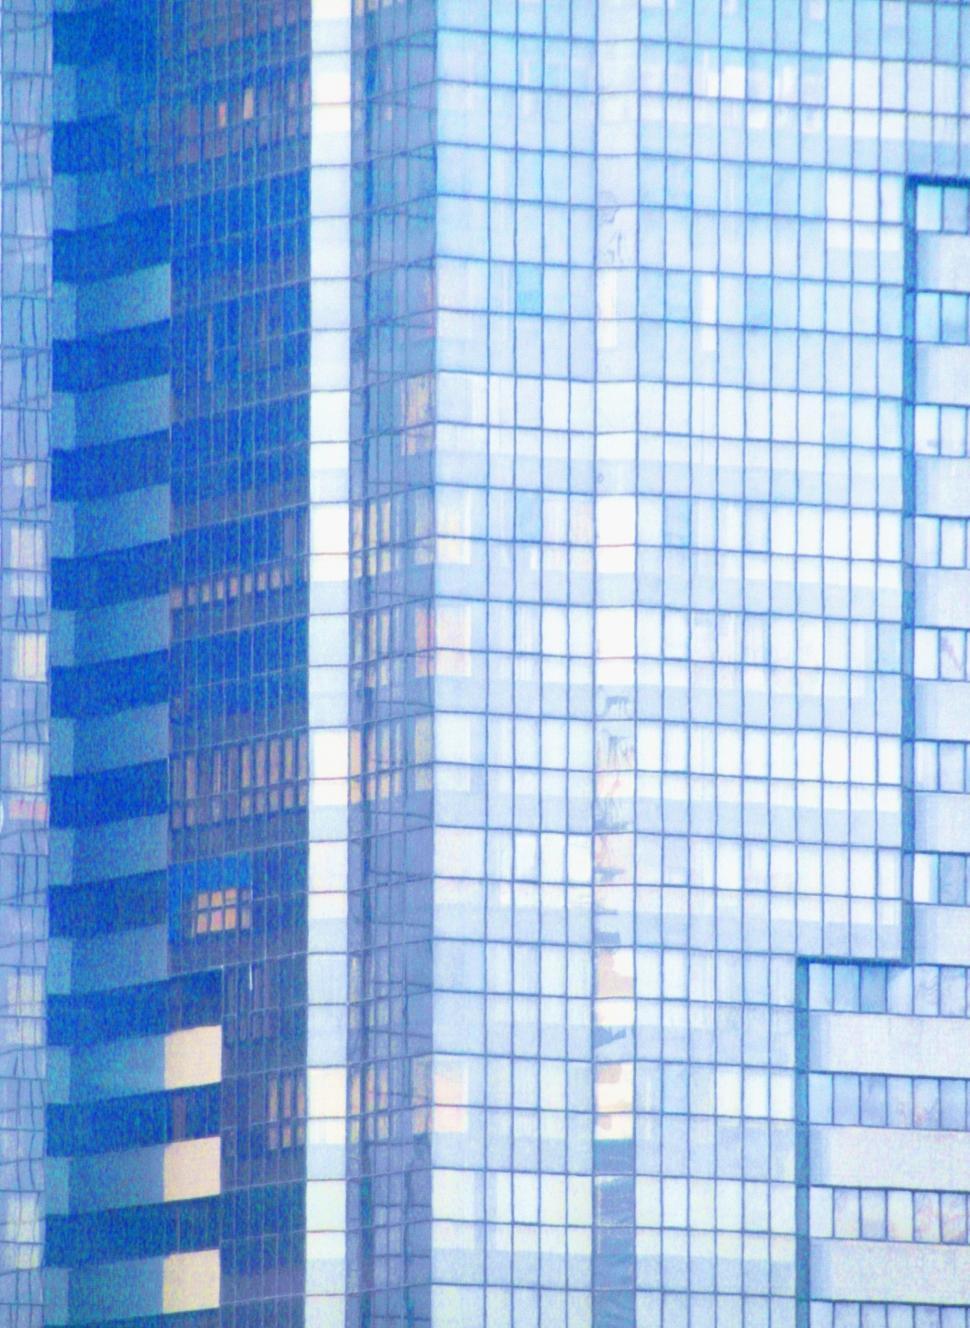 Free Image of Reflective Office Block 